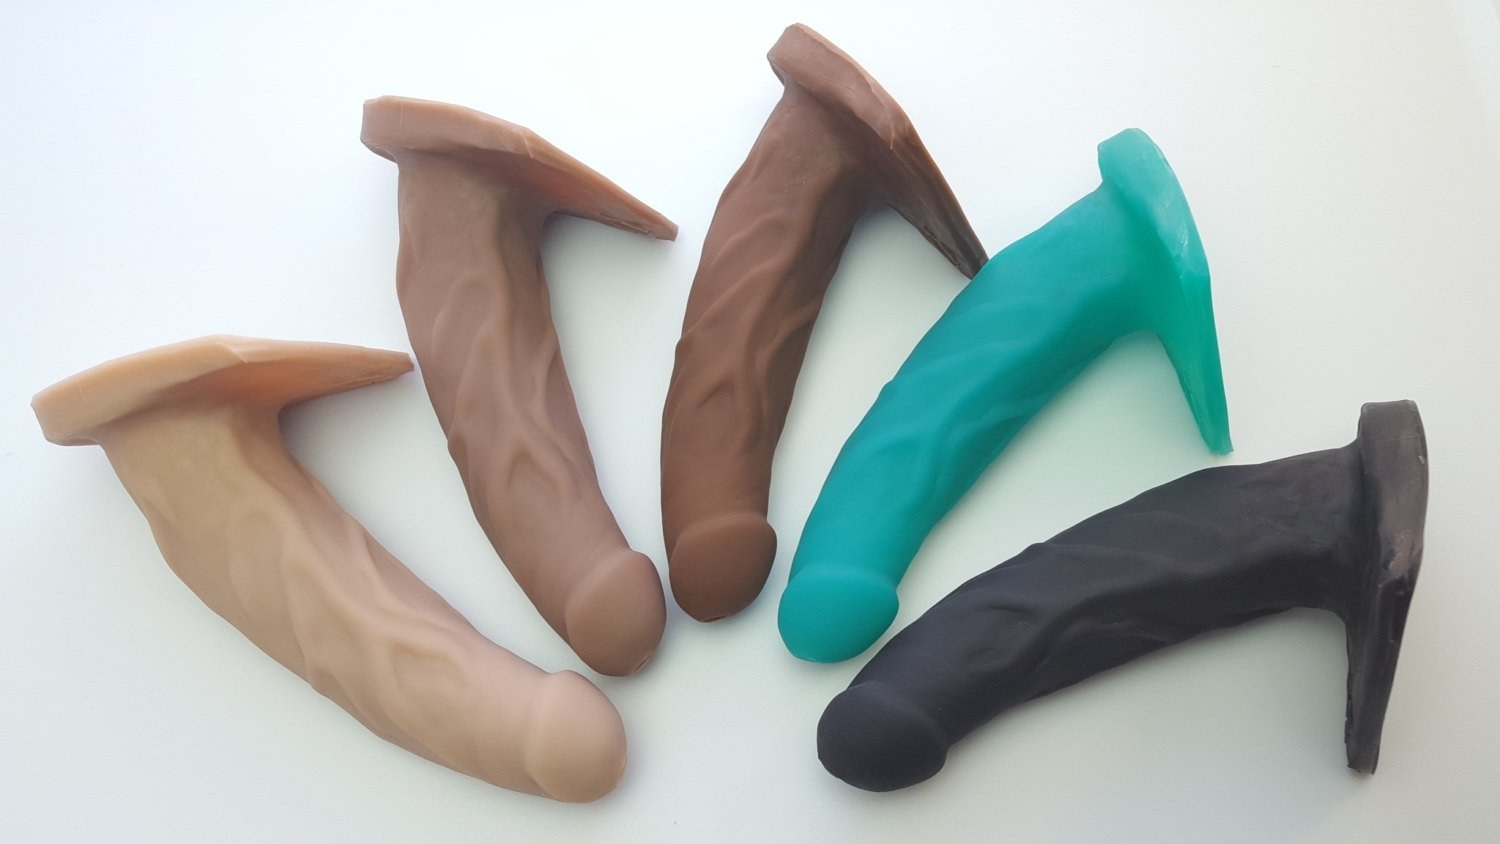 five different colored BJ toys